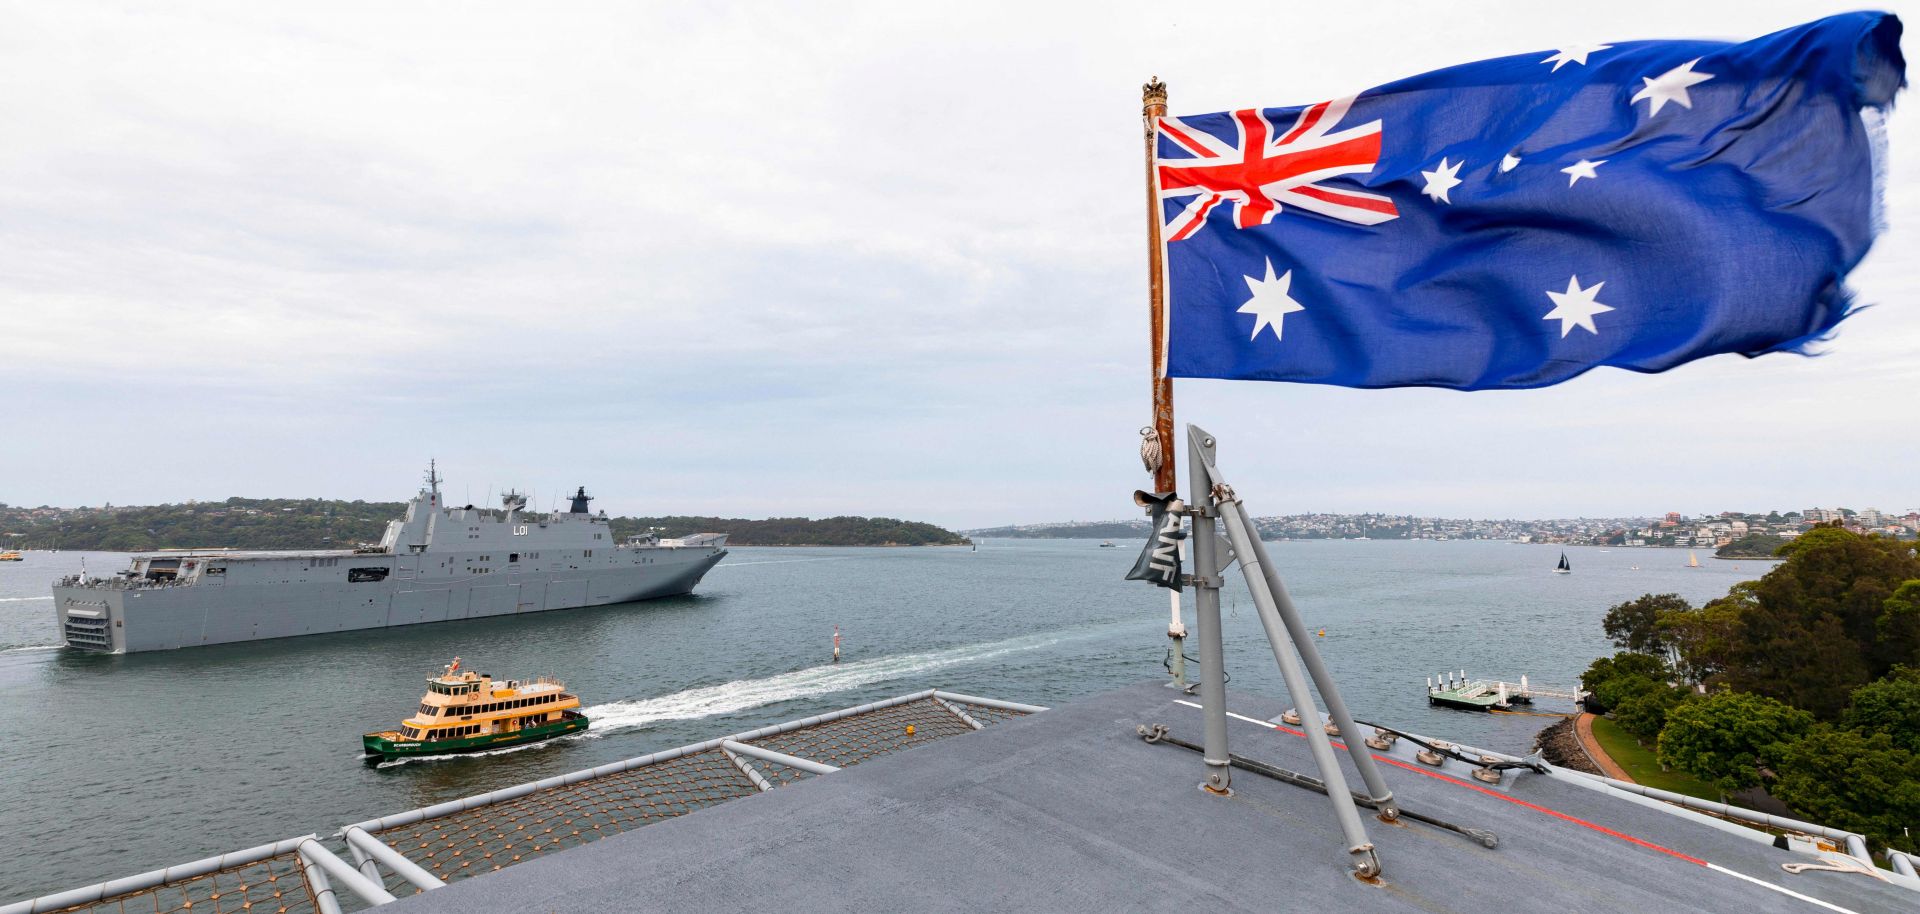 An Australian flag waves as a warship transits a waterway in the background in a photo taken on Jan. 18, 2020. 